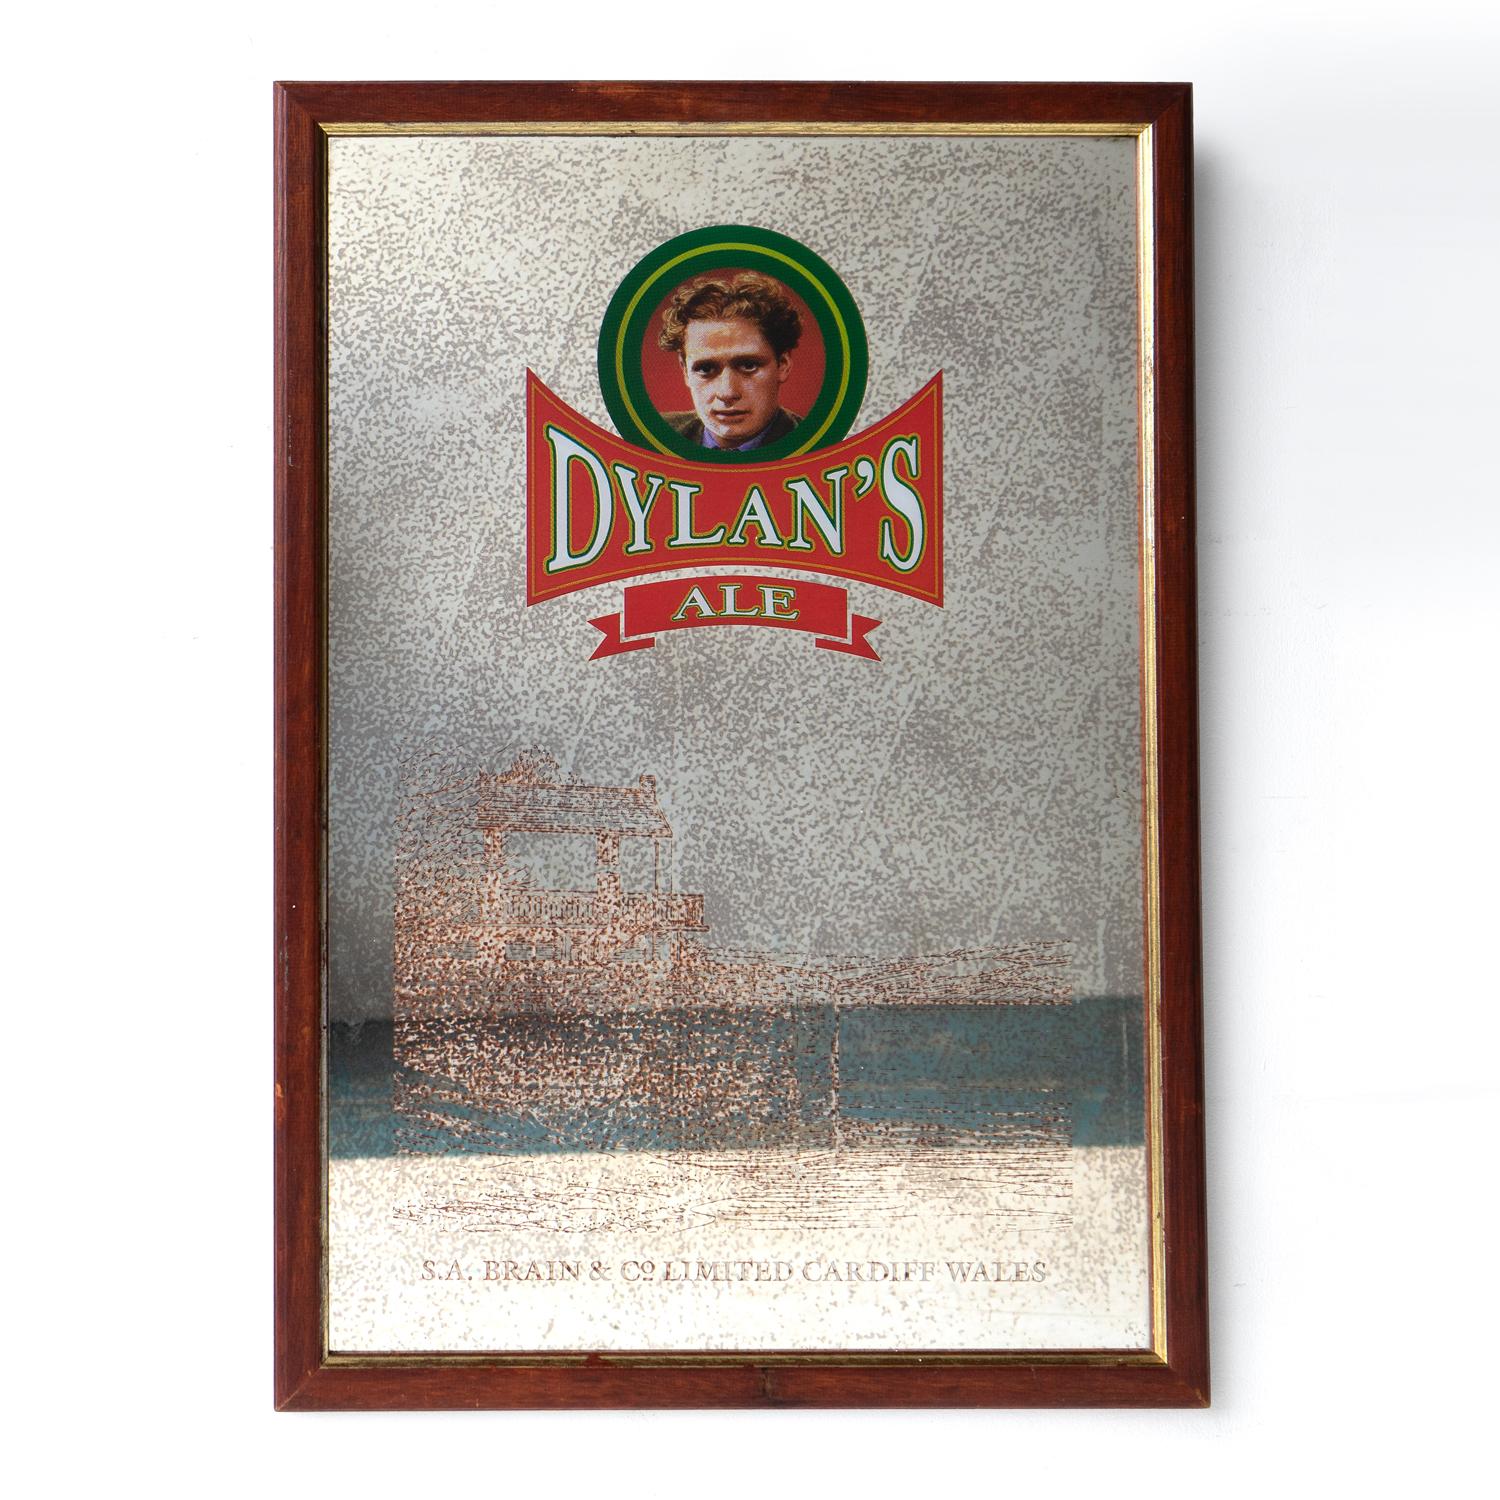 WELSH BREWERY MIRROR, LATE 20TH CENTURY
A scarce example of advertising for a short run ale commemorating the Welsh poet Dylan Thomas by S.A. Brain & Co. Ltd. (Brains) brewery based in Cardiff.

I am not sure how many of these mirrors were produced